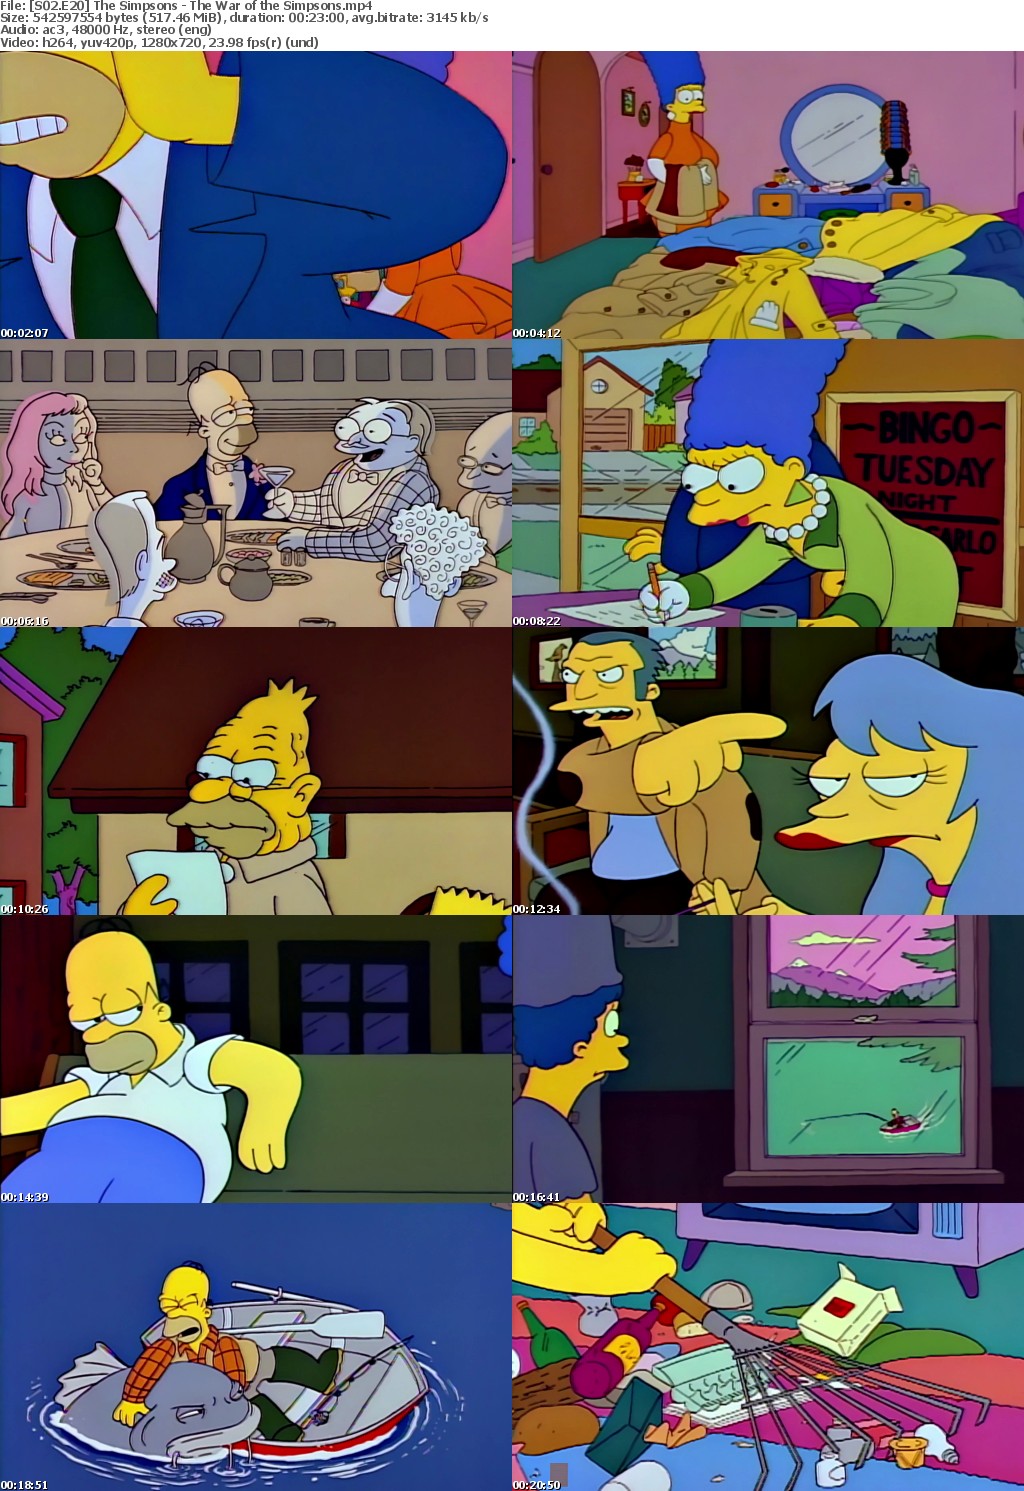 The Simpsons S2 E20 The War of the Simpsons MP4 720p H264 WEBRip EzzRips